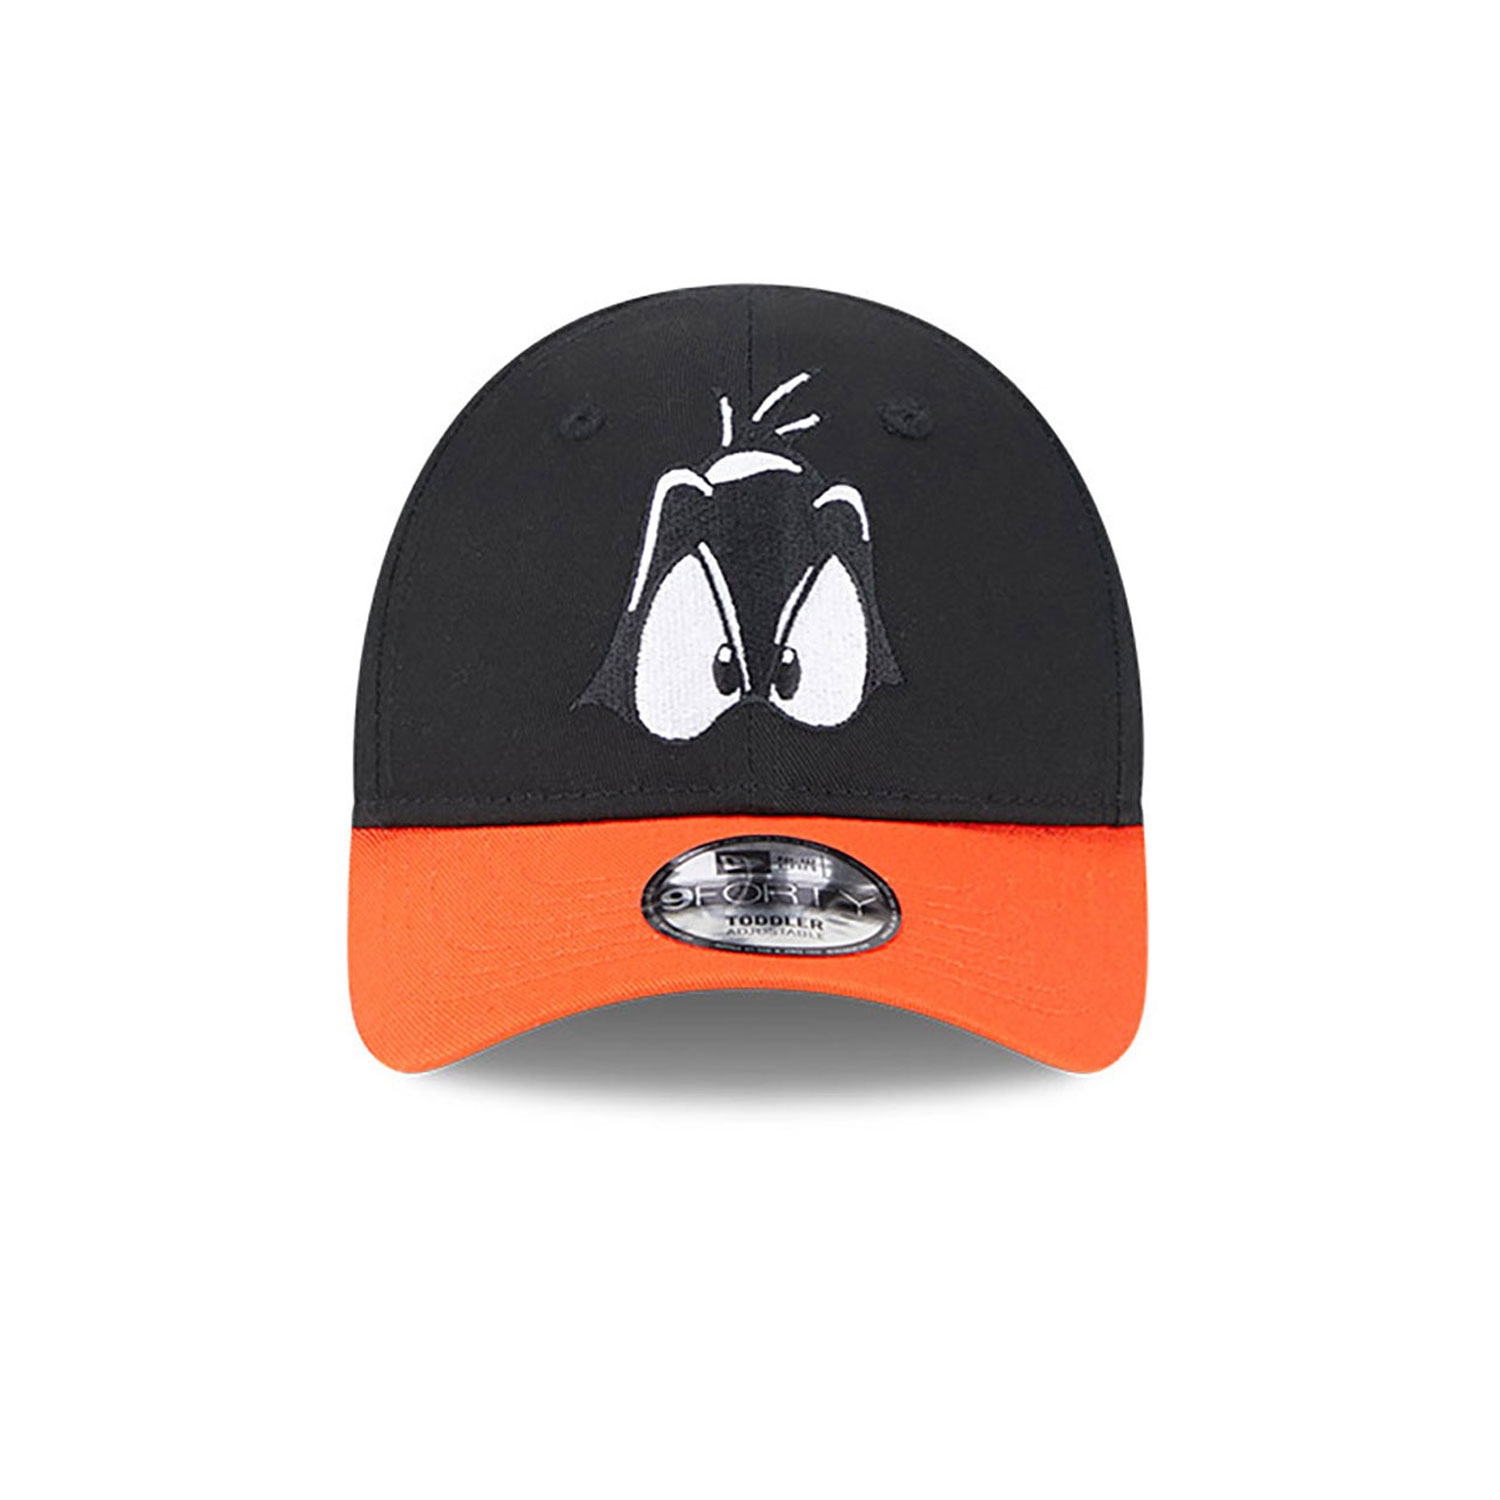 Casquette 9FORTY Daffy Duck Looney Tunes - Bébé